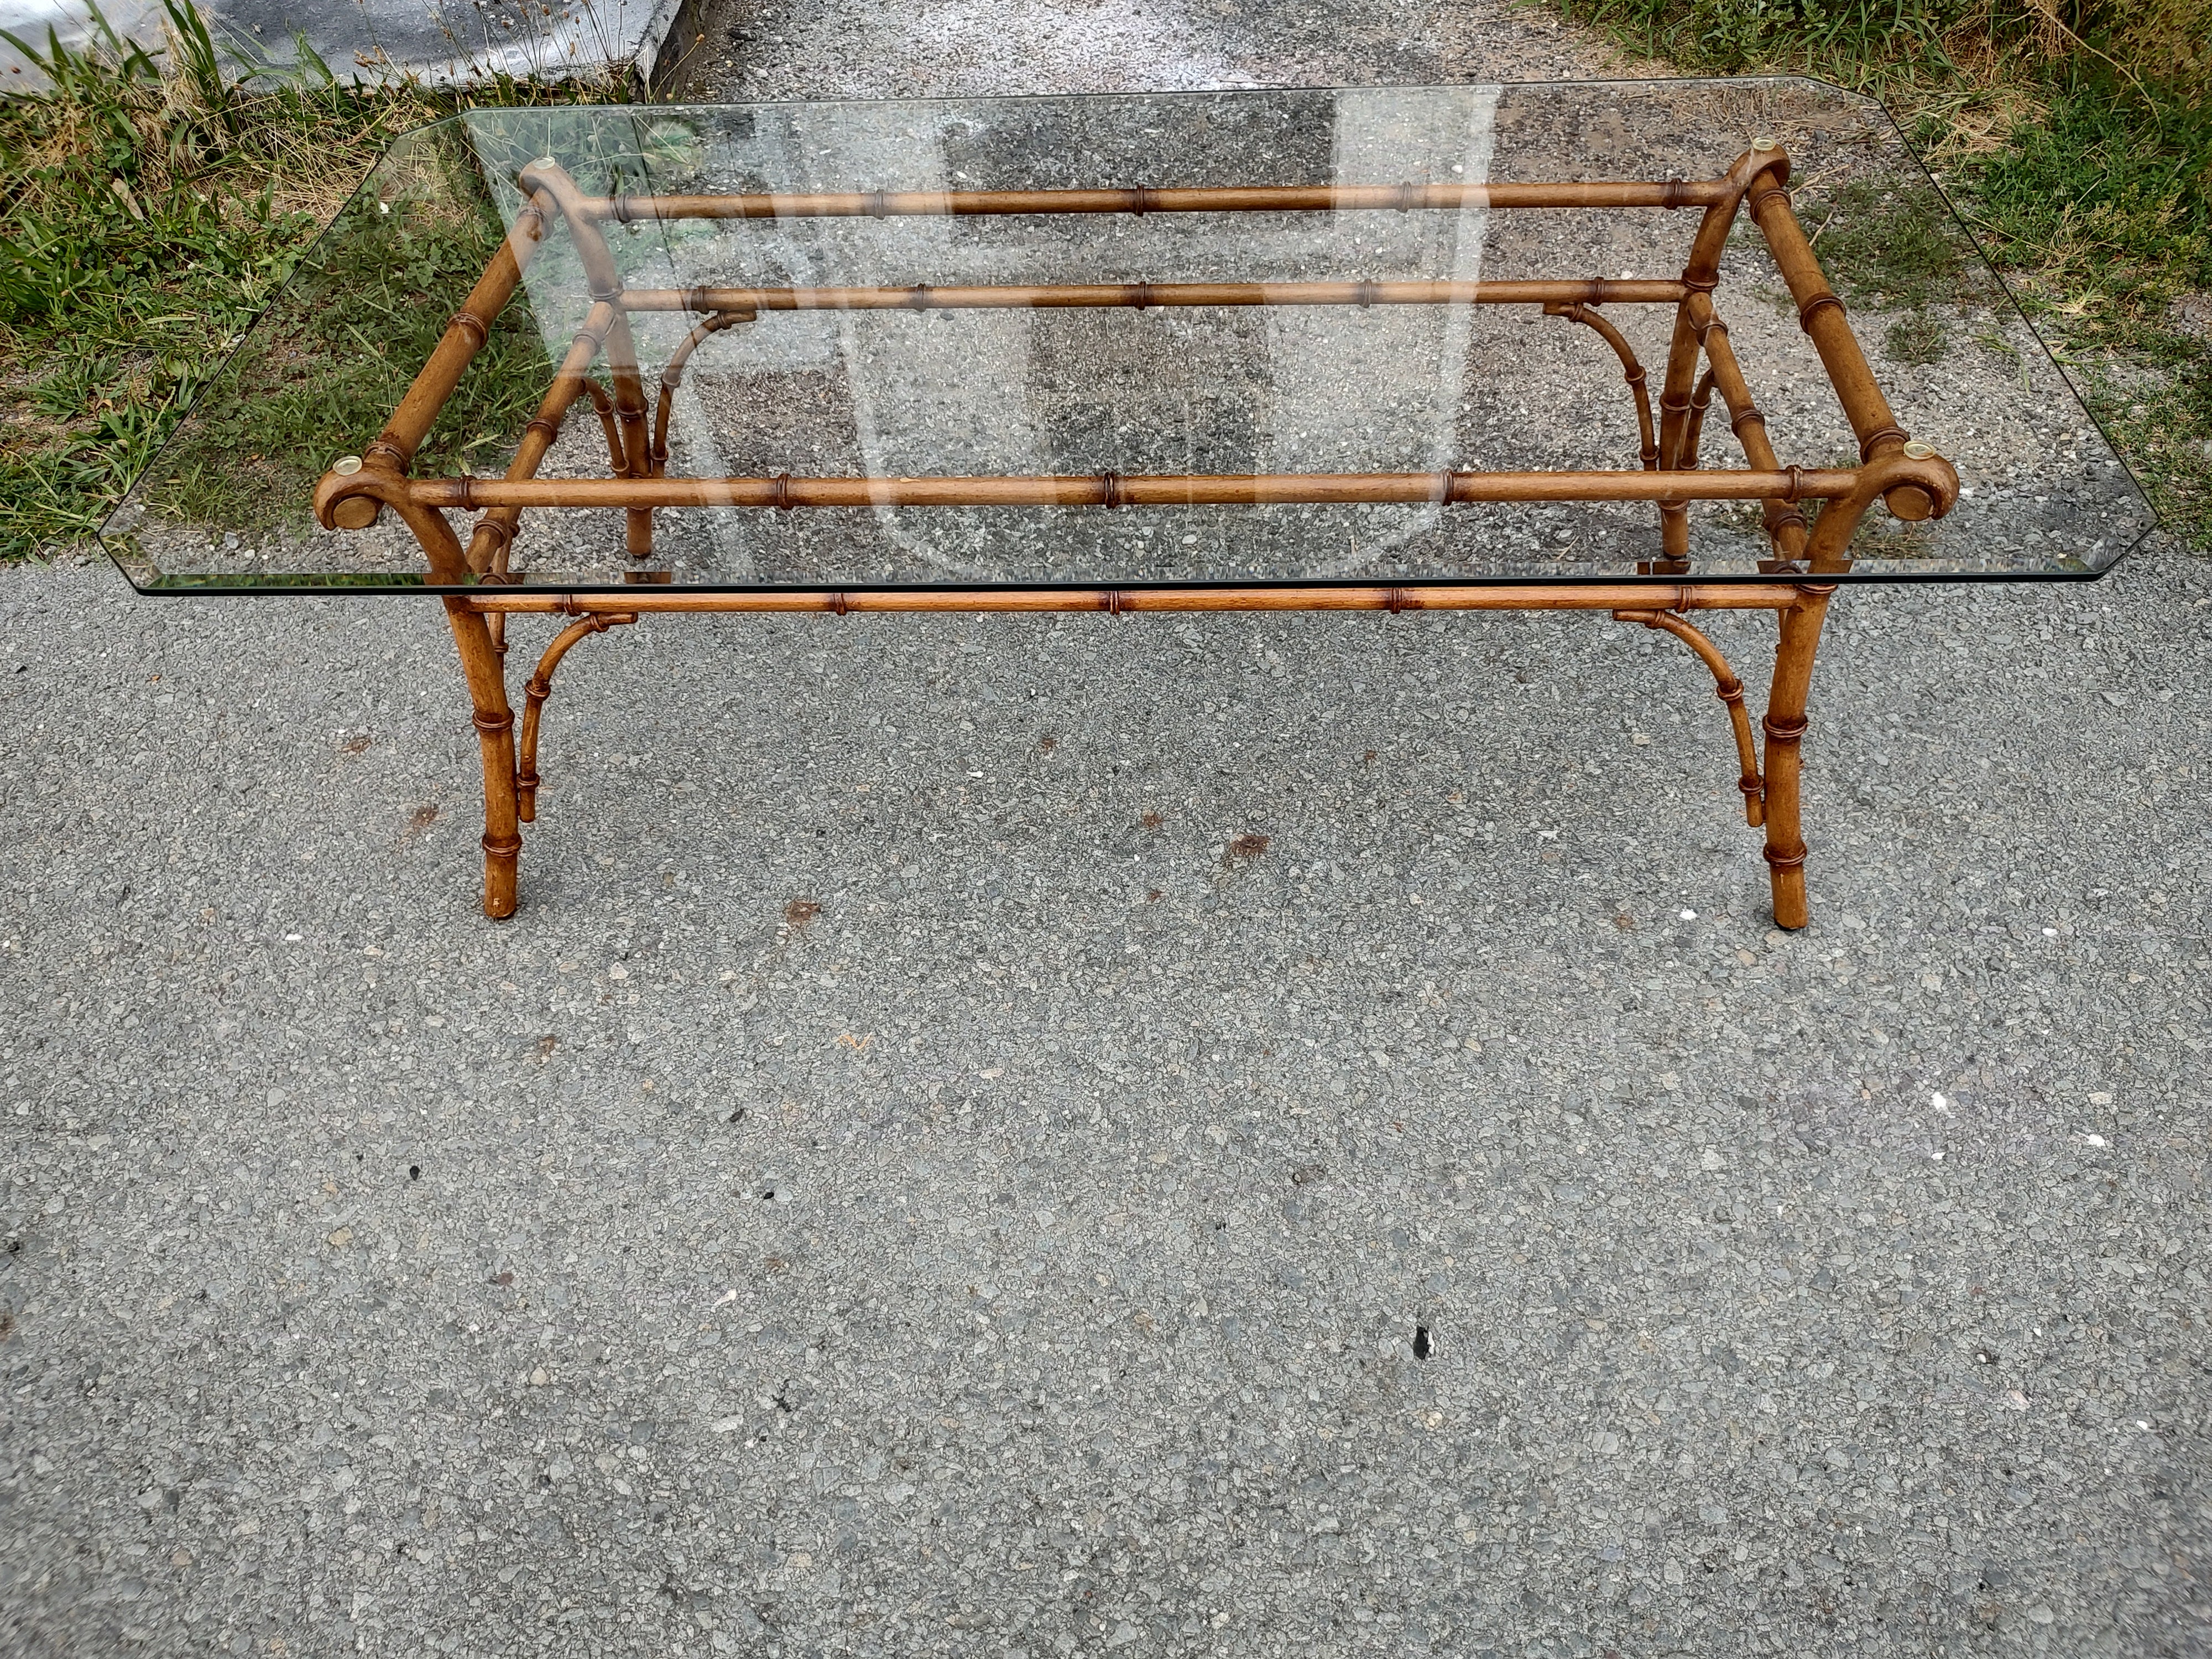 Fabulous faux bamboo cocktail table with the real bamboo look. Frame is metal, but it resembles bamboo very well. Beveled Glass Top sits flush on rubber bumpers which prevent it from shifting once in place. Quality piece.